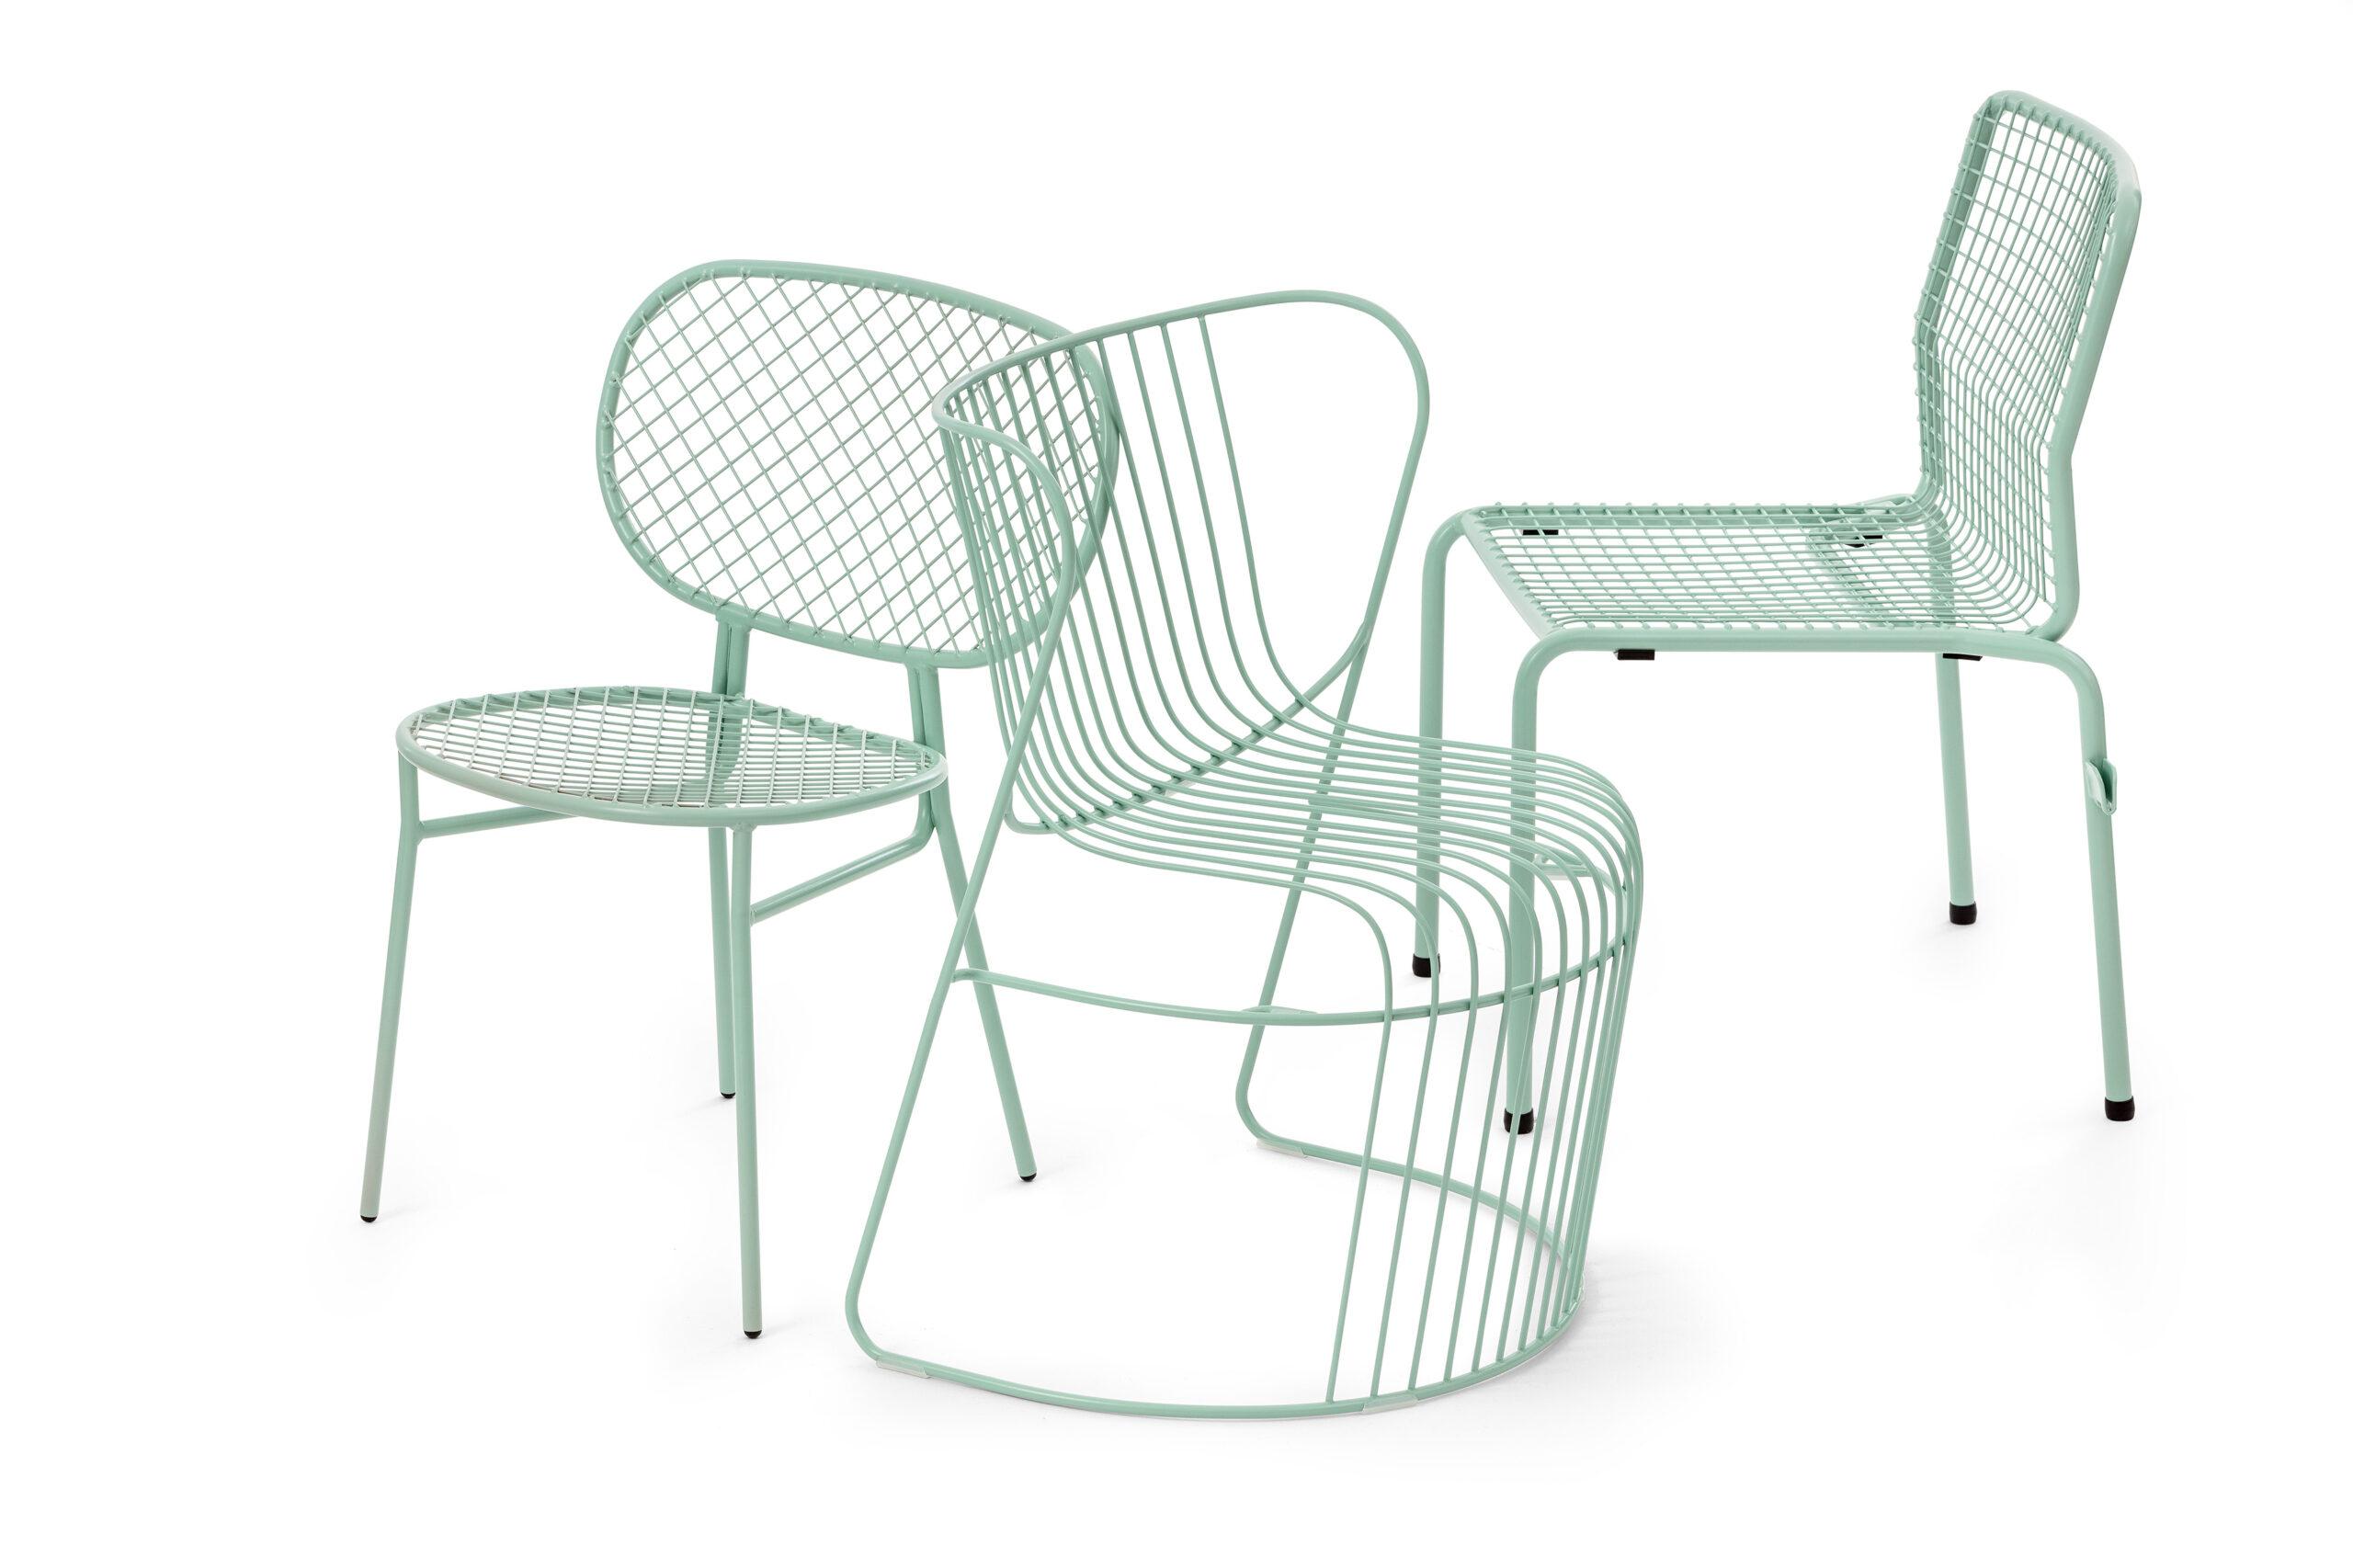 Three mint green chairs made with ribbons of curved steel.